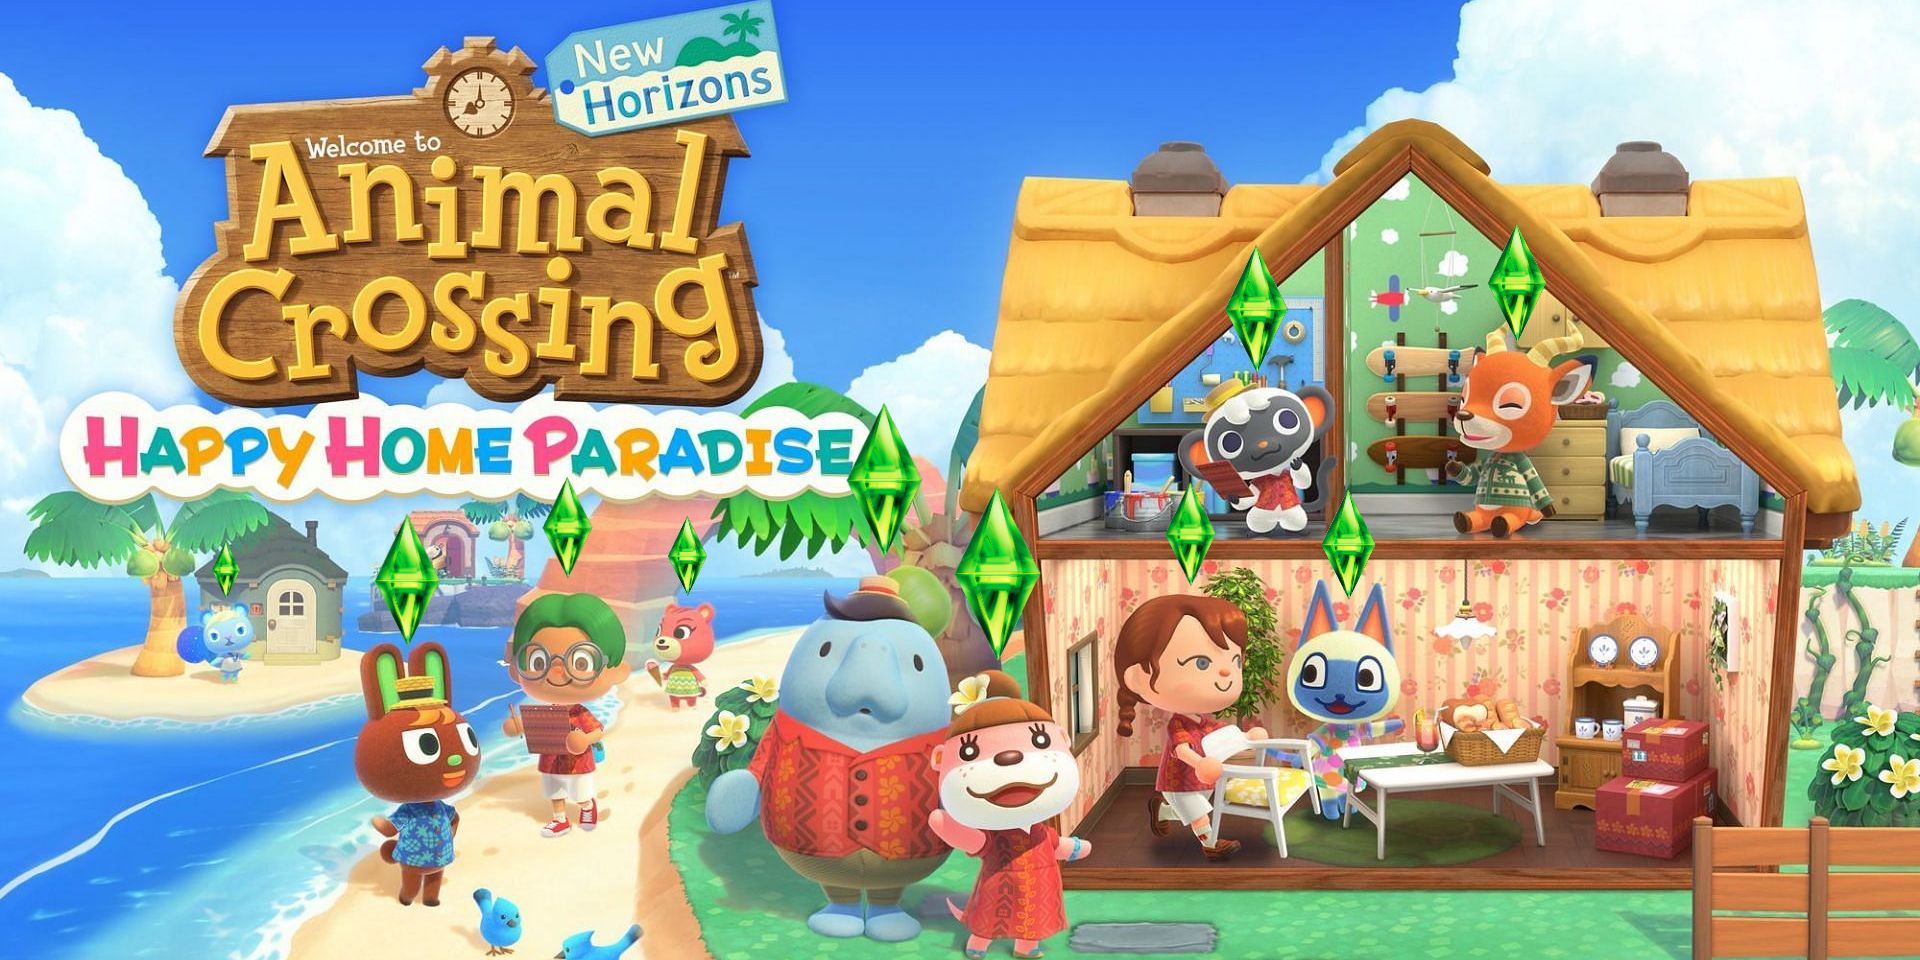 Happy Home Paradise is The Sims in Animal Crossing Header